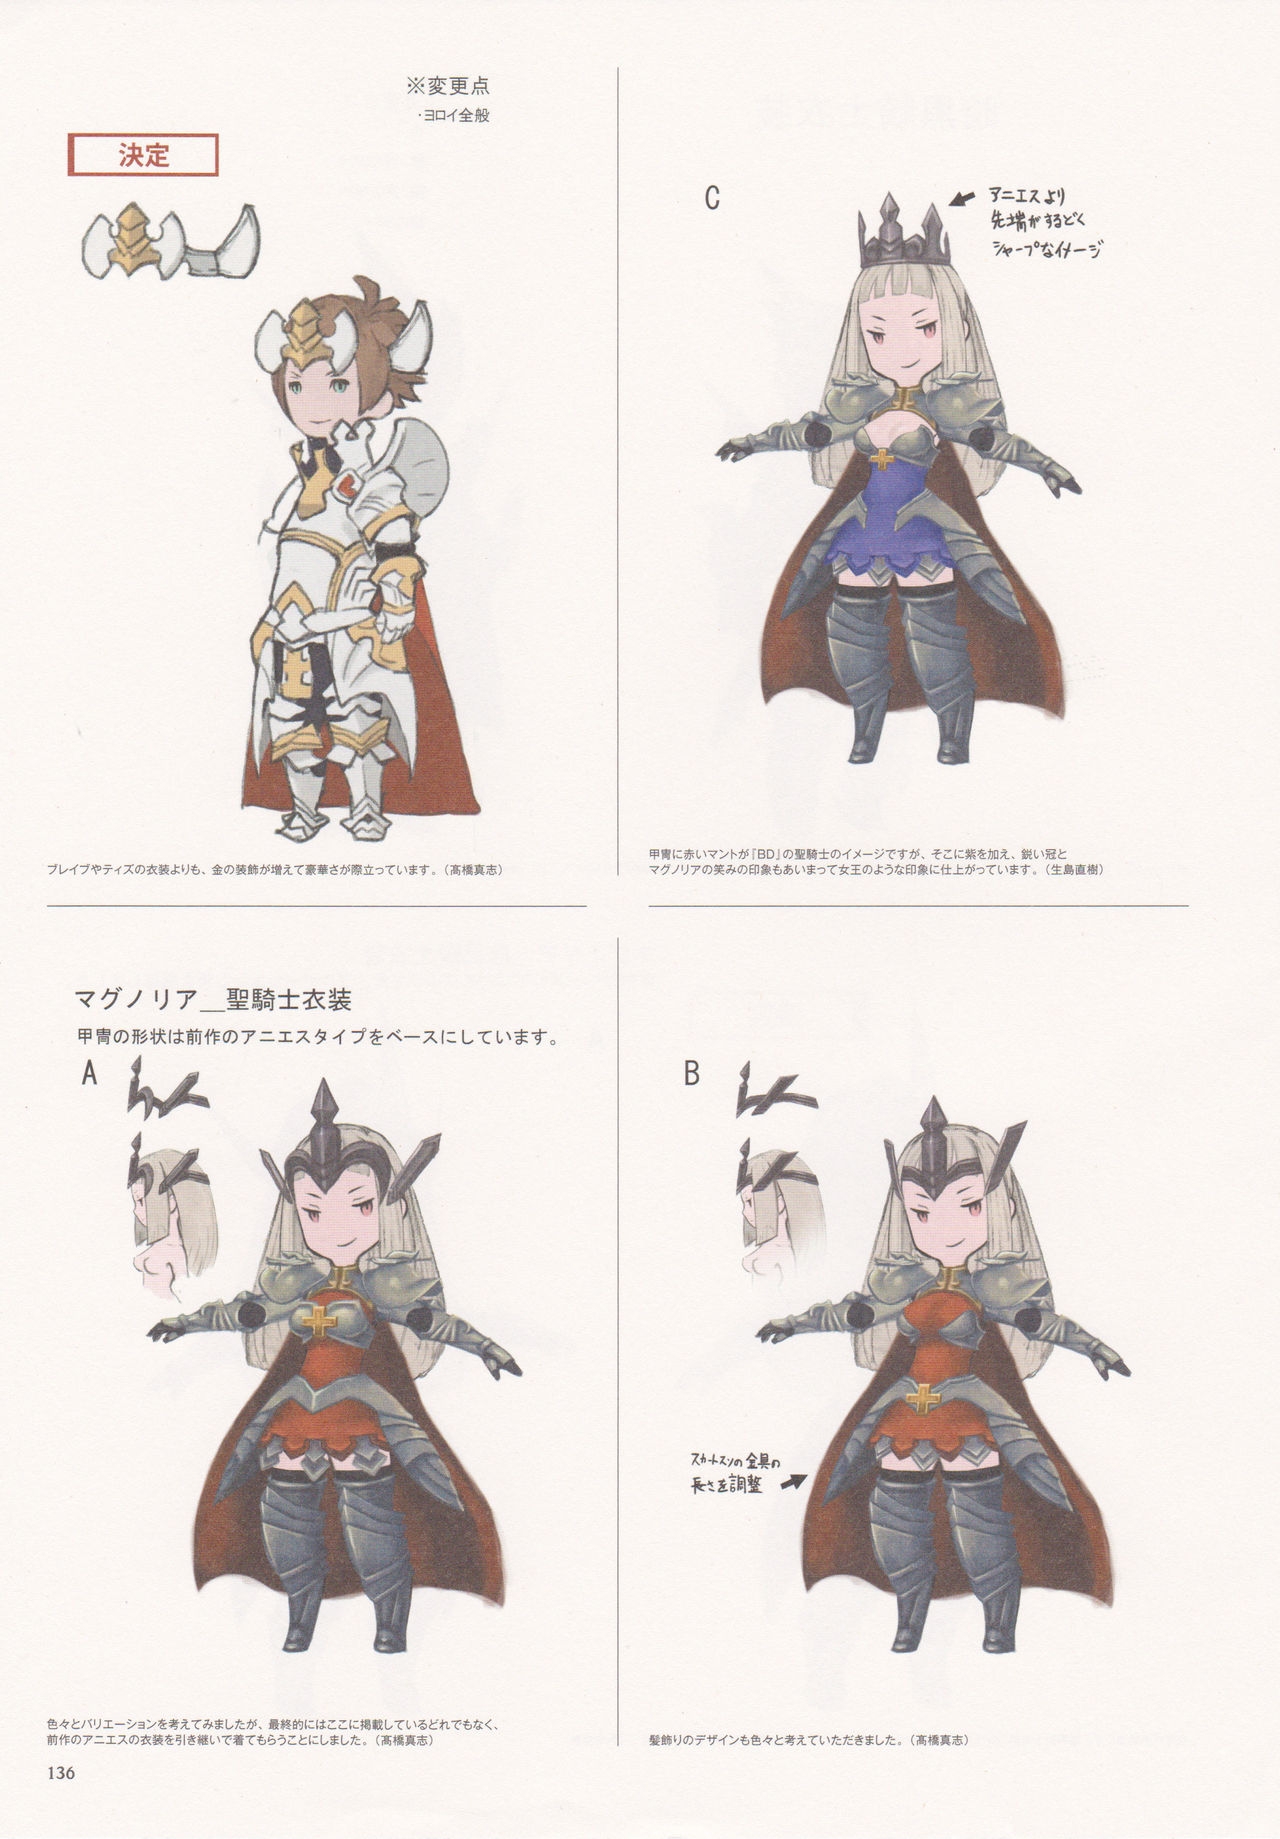 Bravely Second - End Layer - Design Works THE ART OF BRAVELY 2013-2015 136